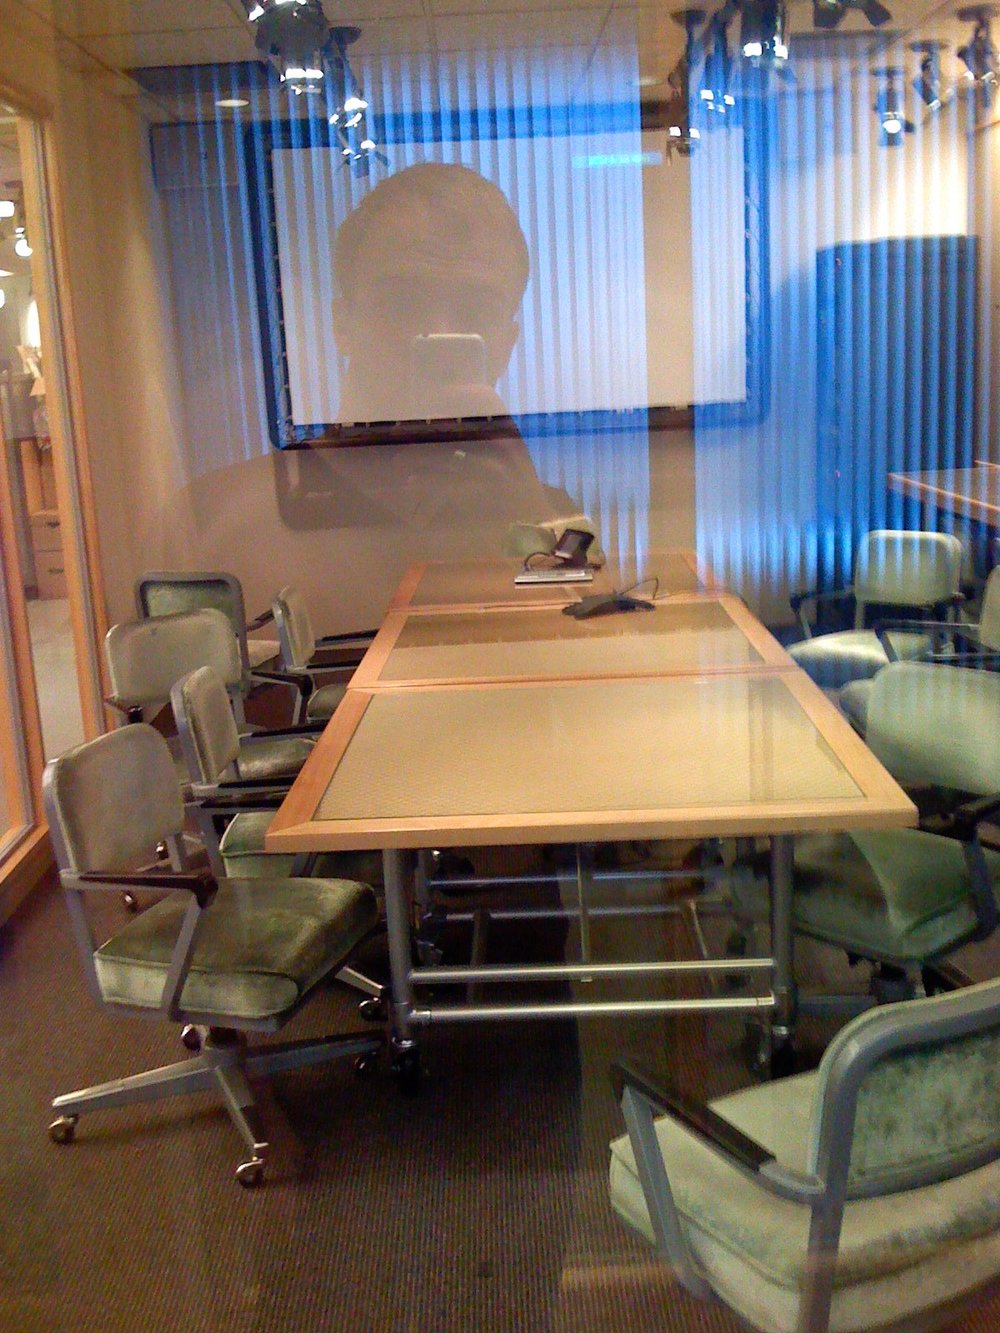  Workspace at the agency. Headed to work. Shot on iPhone, Aug 3, 2007 